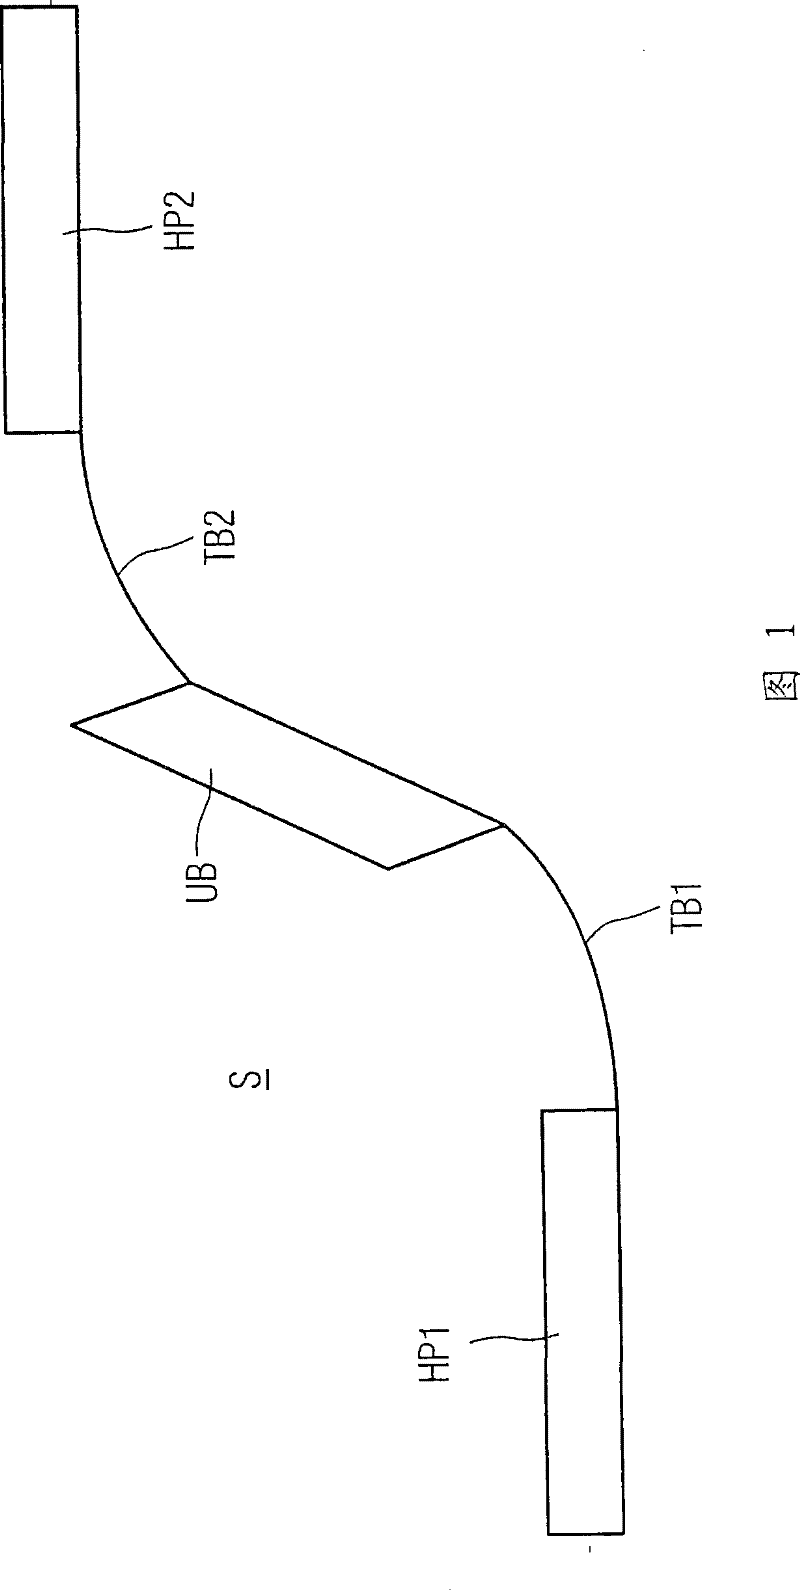 Method and equipment for automatically controlling track vehicle and lines used for track vehicles